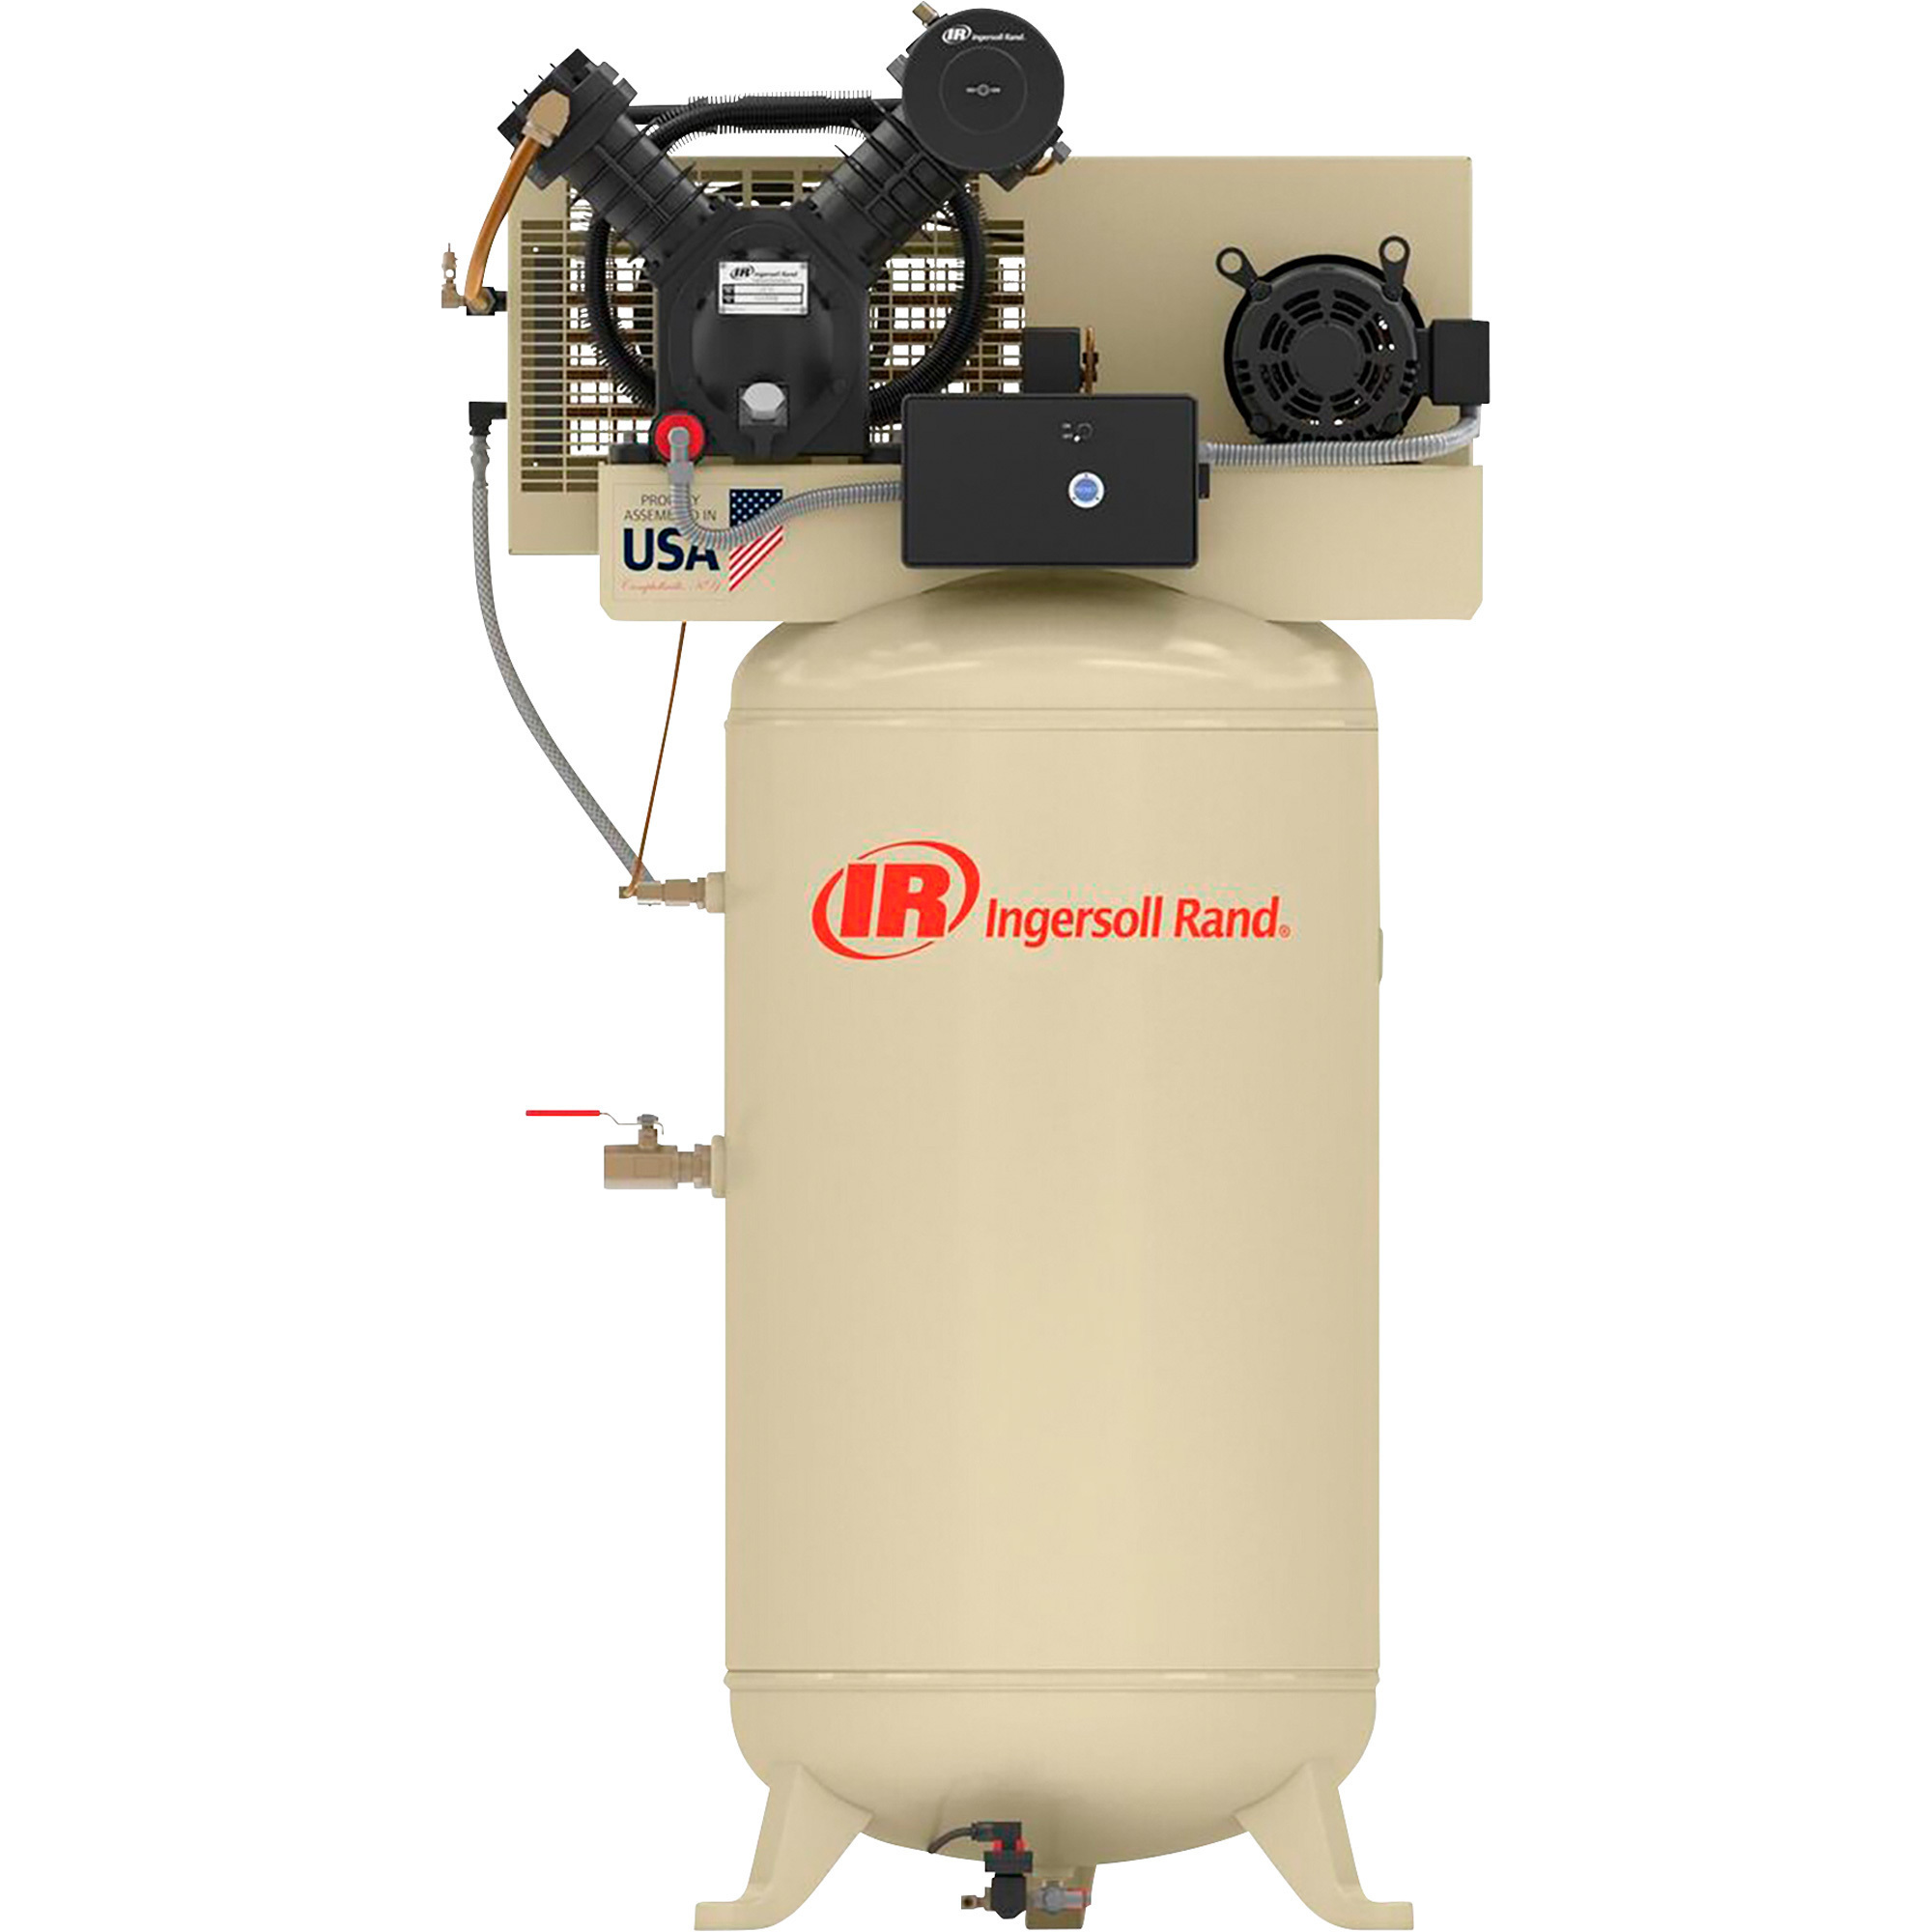 Ingersoll Rand Type-30 Reciprocating Air Compressor (Premium Package), 5 HP, 230 Volt, 1 Phase, 80 Gallon, Model 2475N5FP